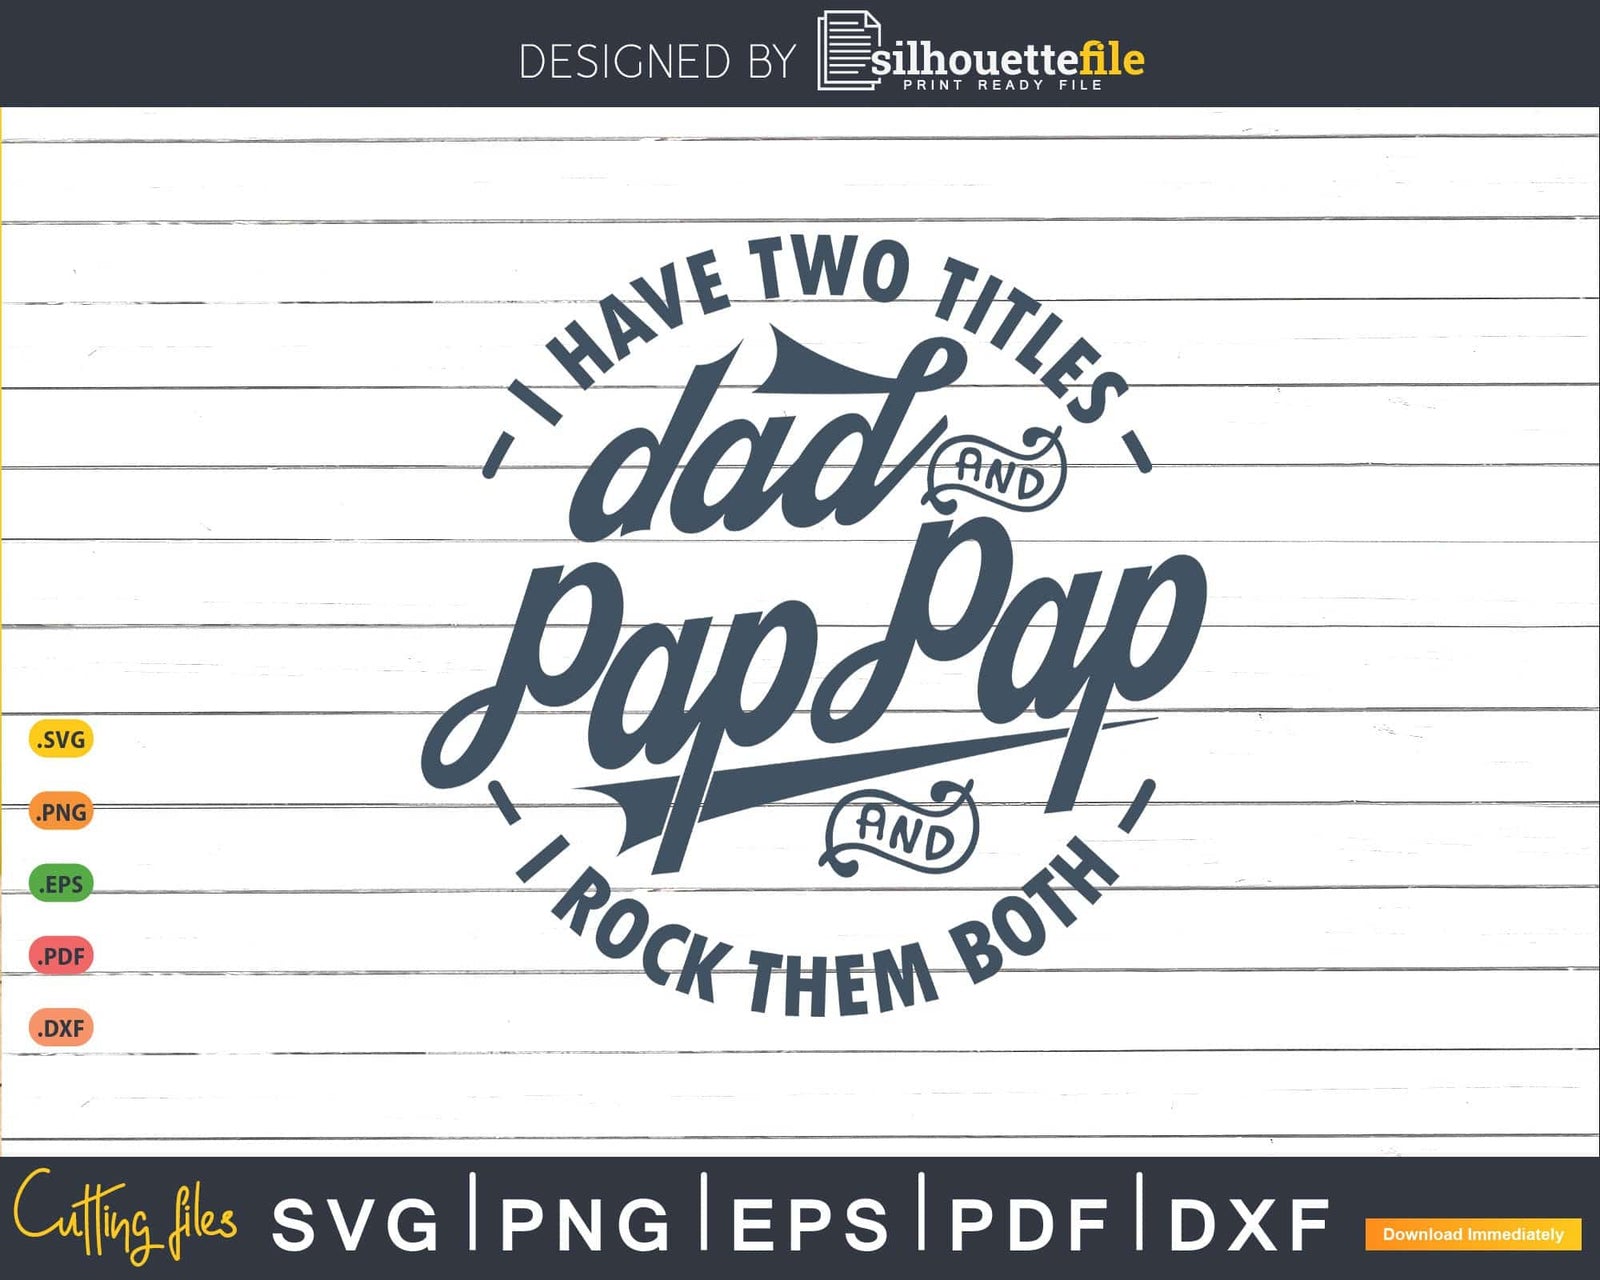 I Have Two Titles Dad And Pap Pap I Rock Them Both Svg Png Files Silhouettefile